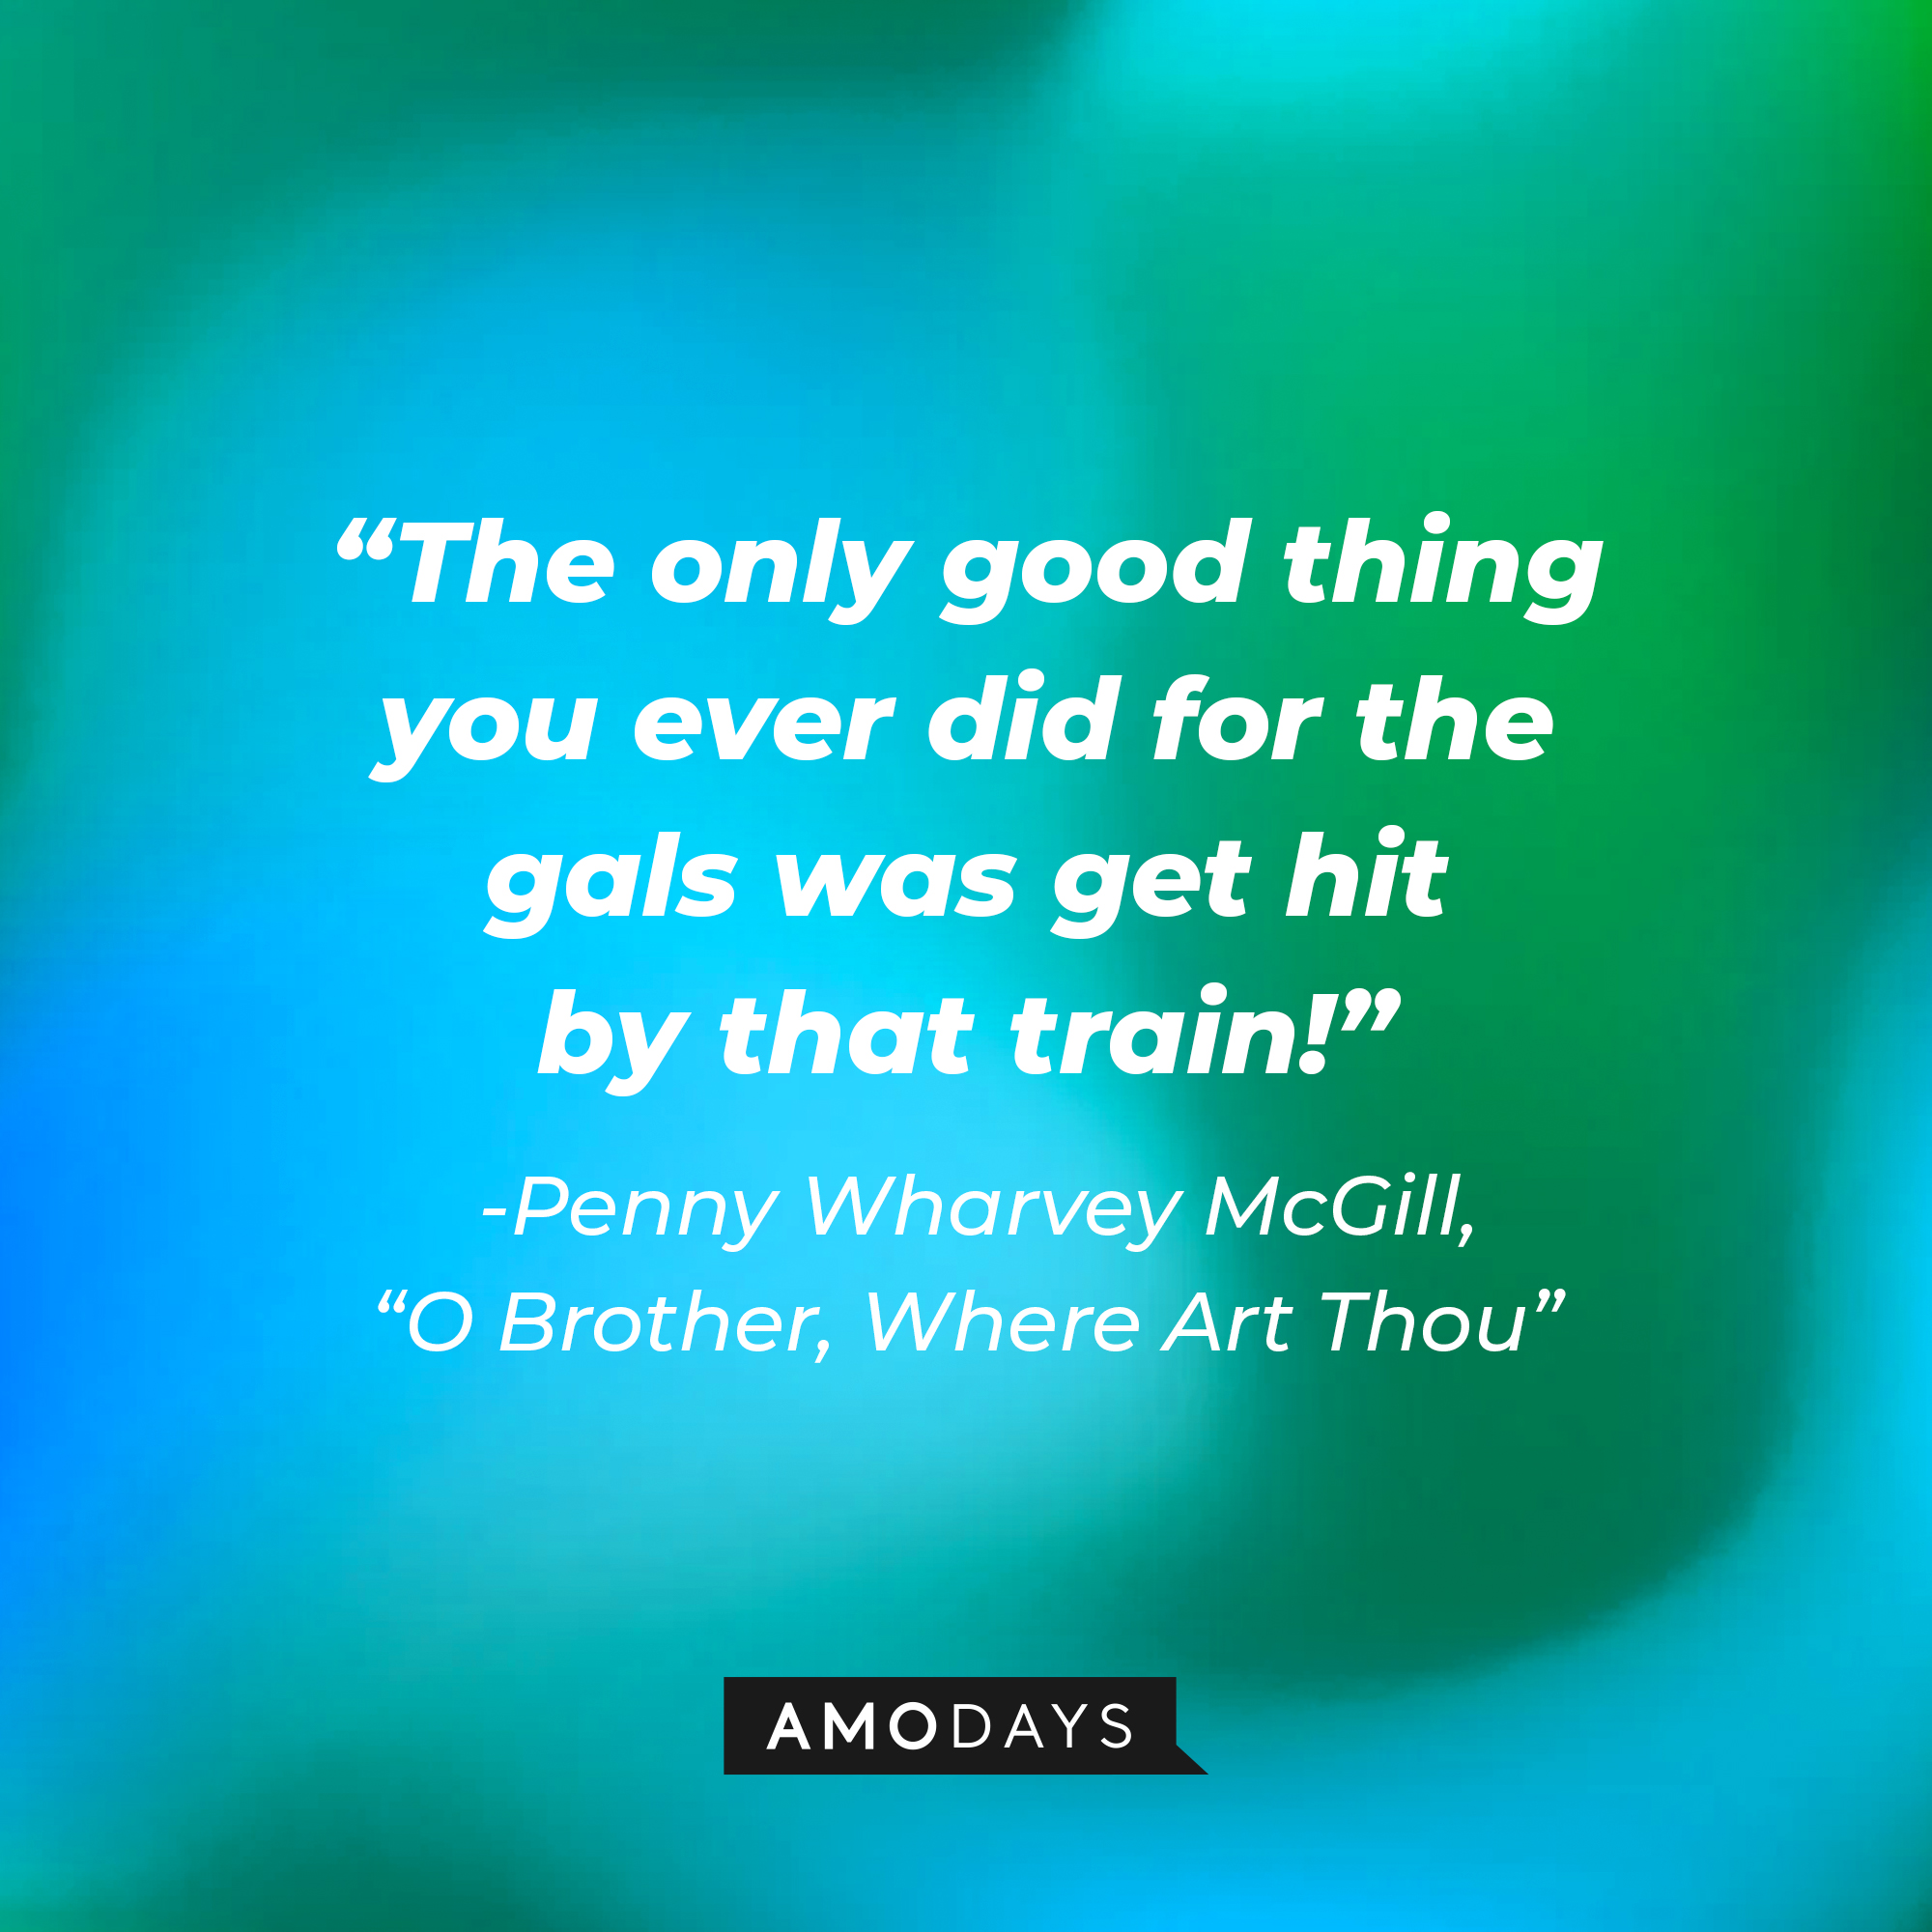 Penny Wharvey McGill's quote in "O Brother, Where Art Thou:" "The only good thing you ever did for the gals was get hit by that train!" | Source: AmoDays